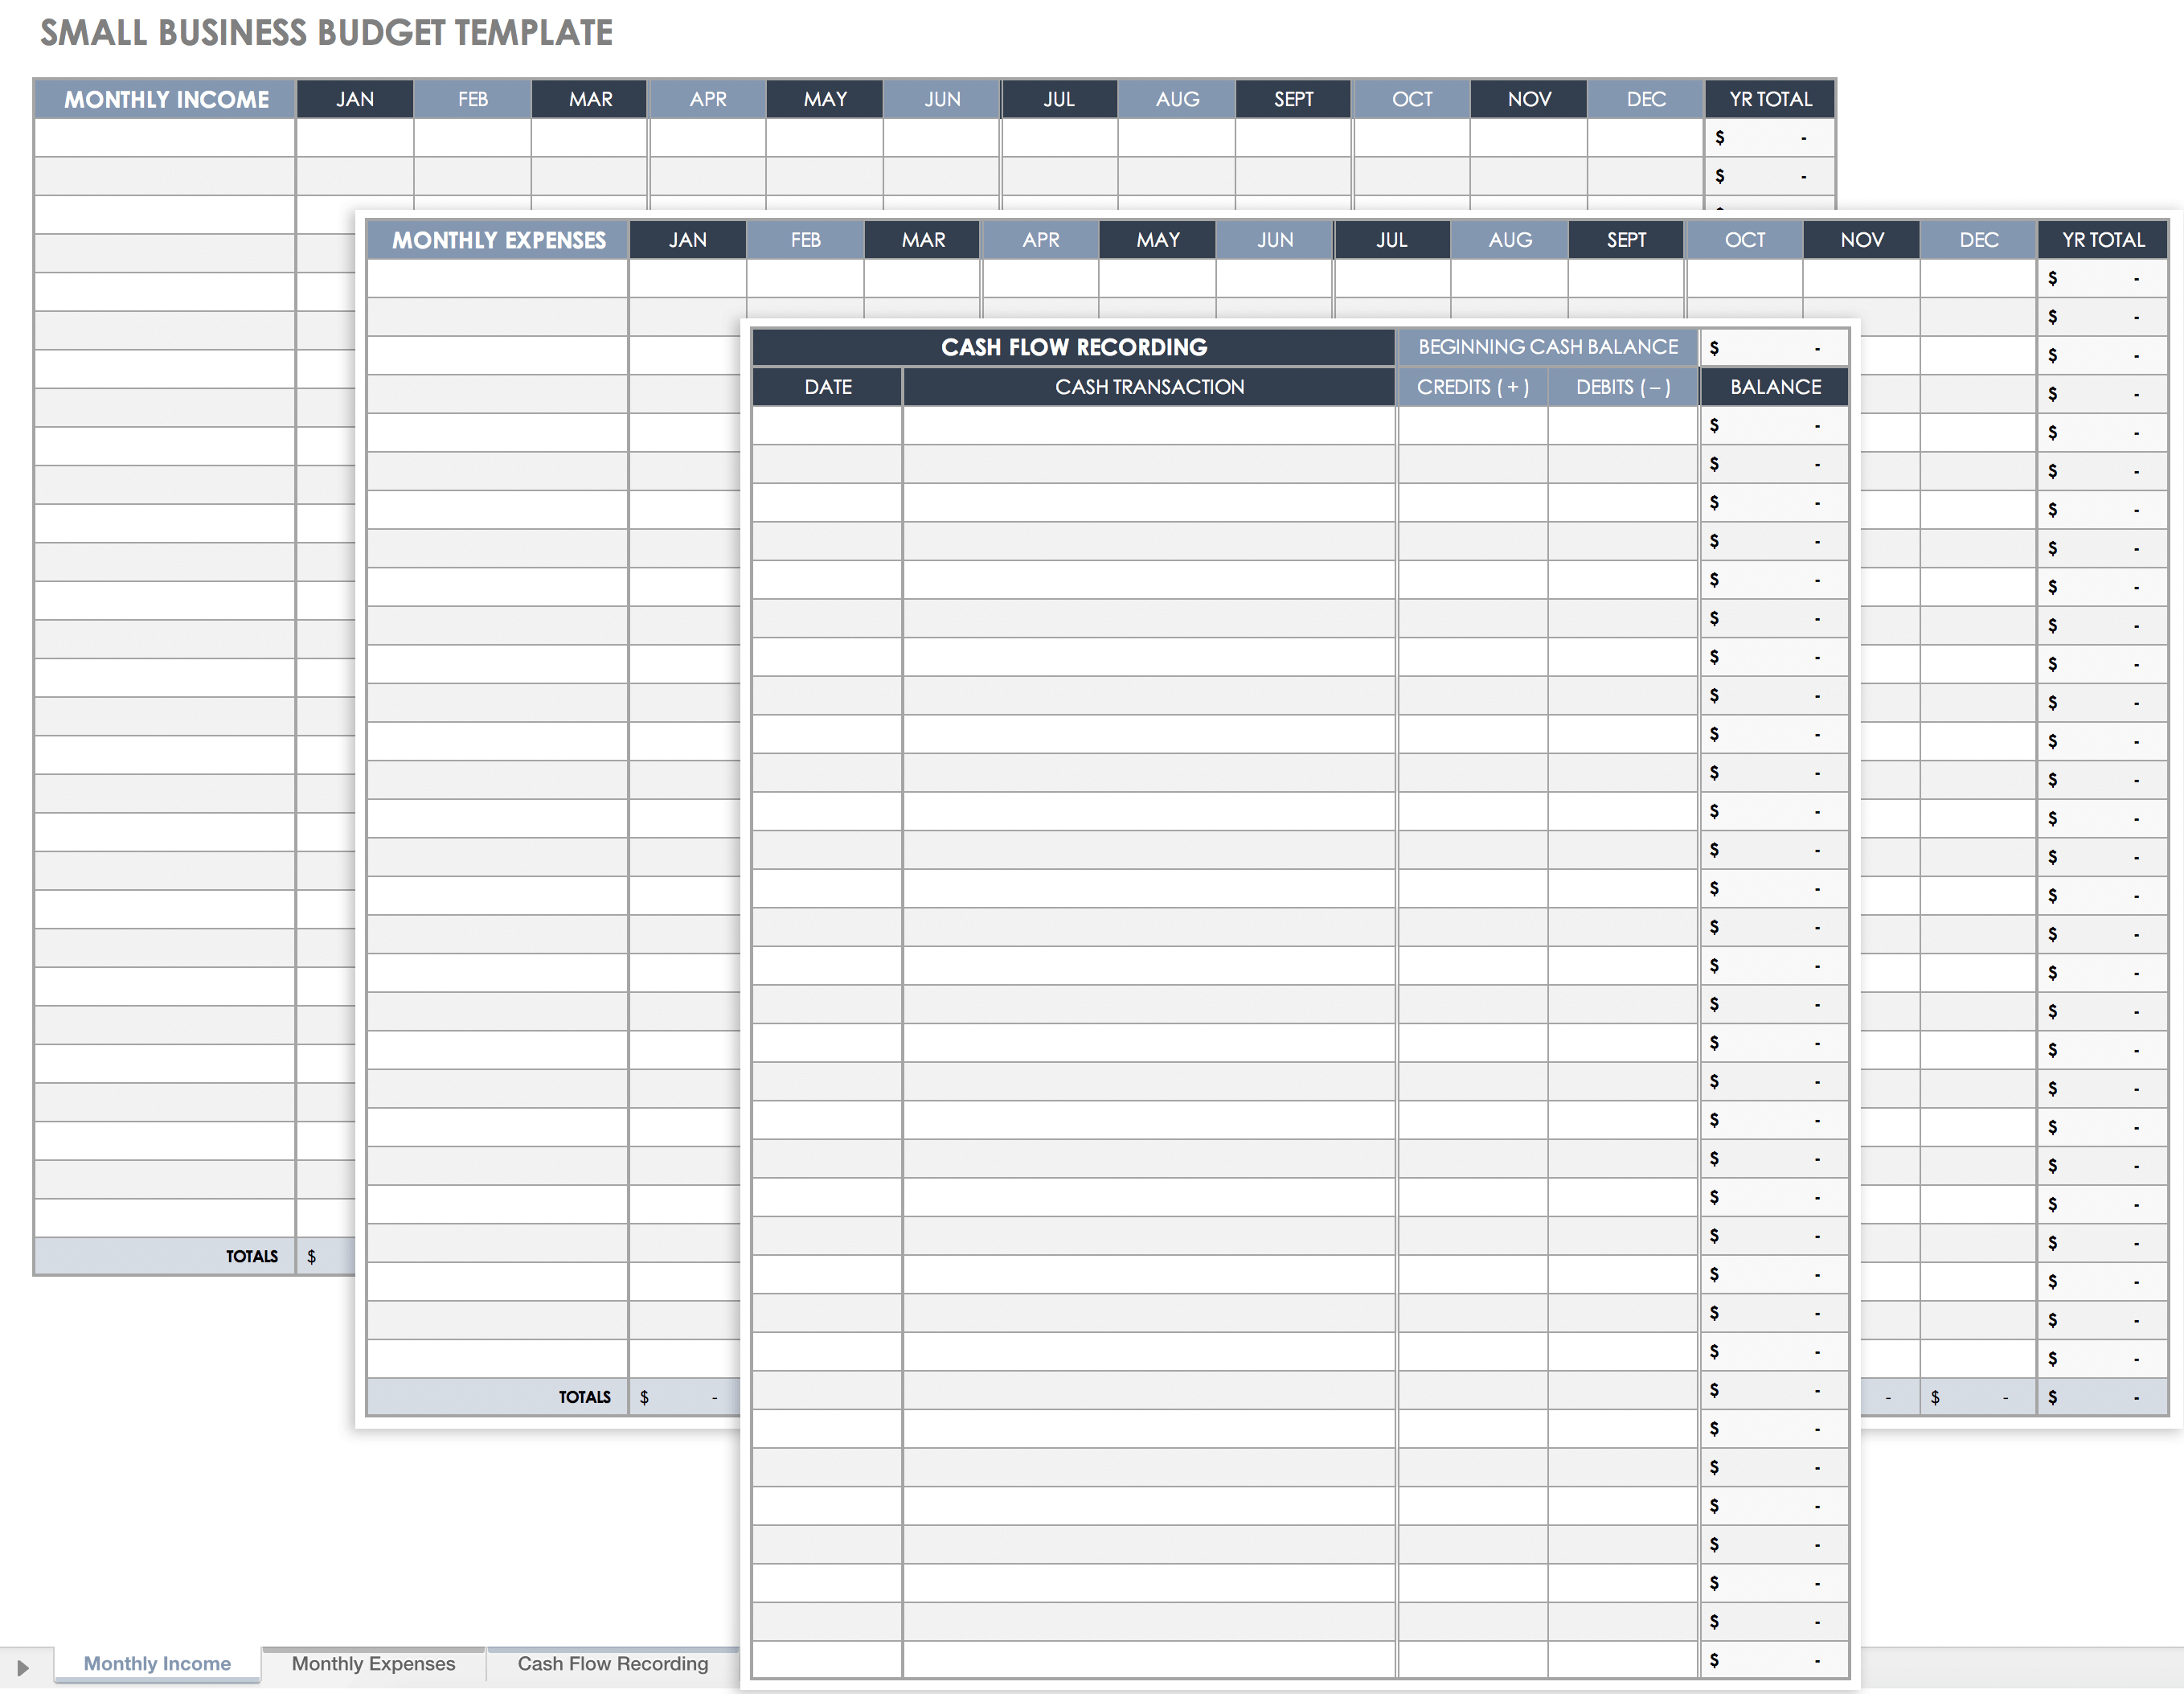 Free Small Business Budget Templates  Smartsheet Regarding Business Unit Budget Template Regarding Business Unit Budget Template